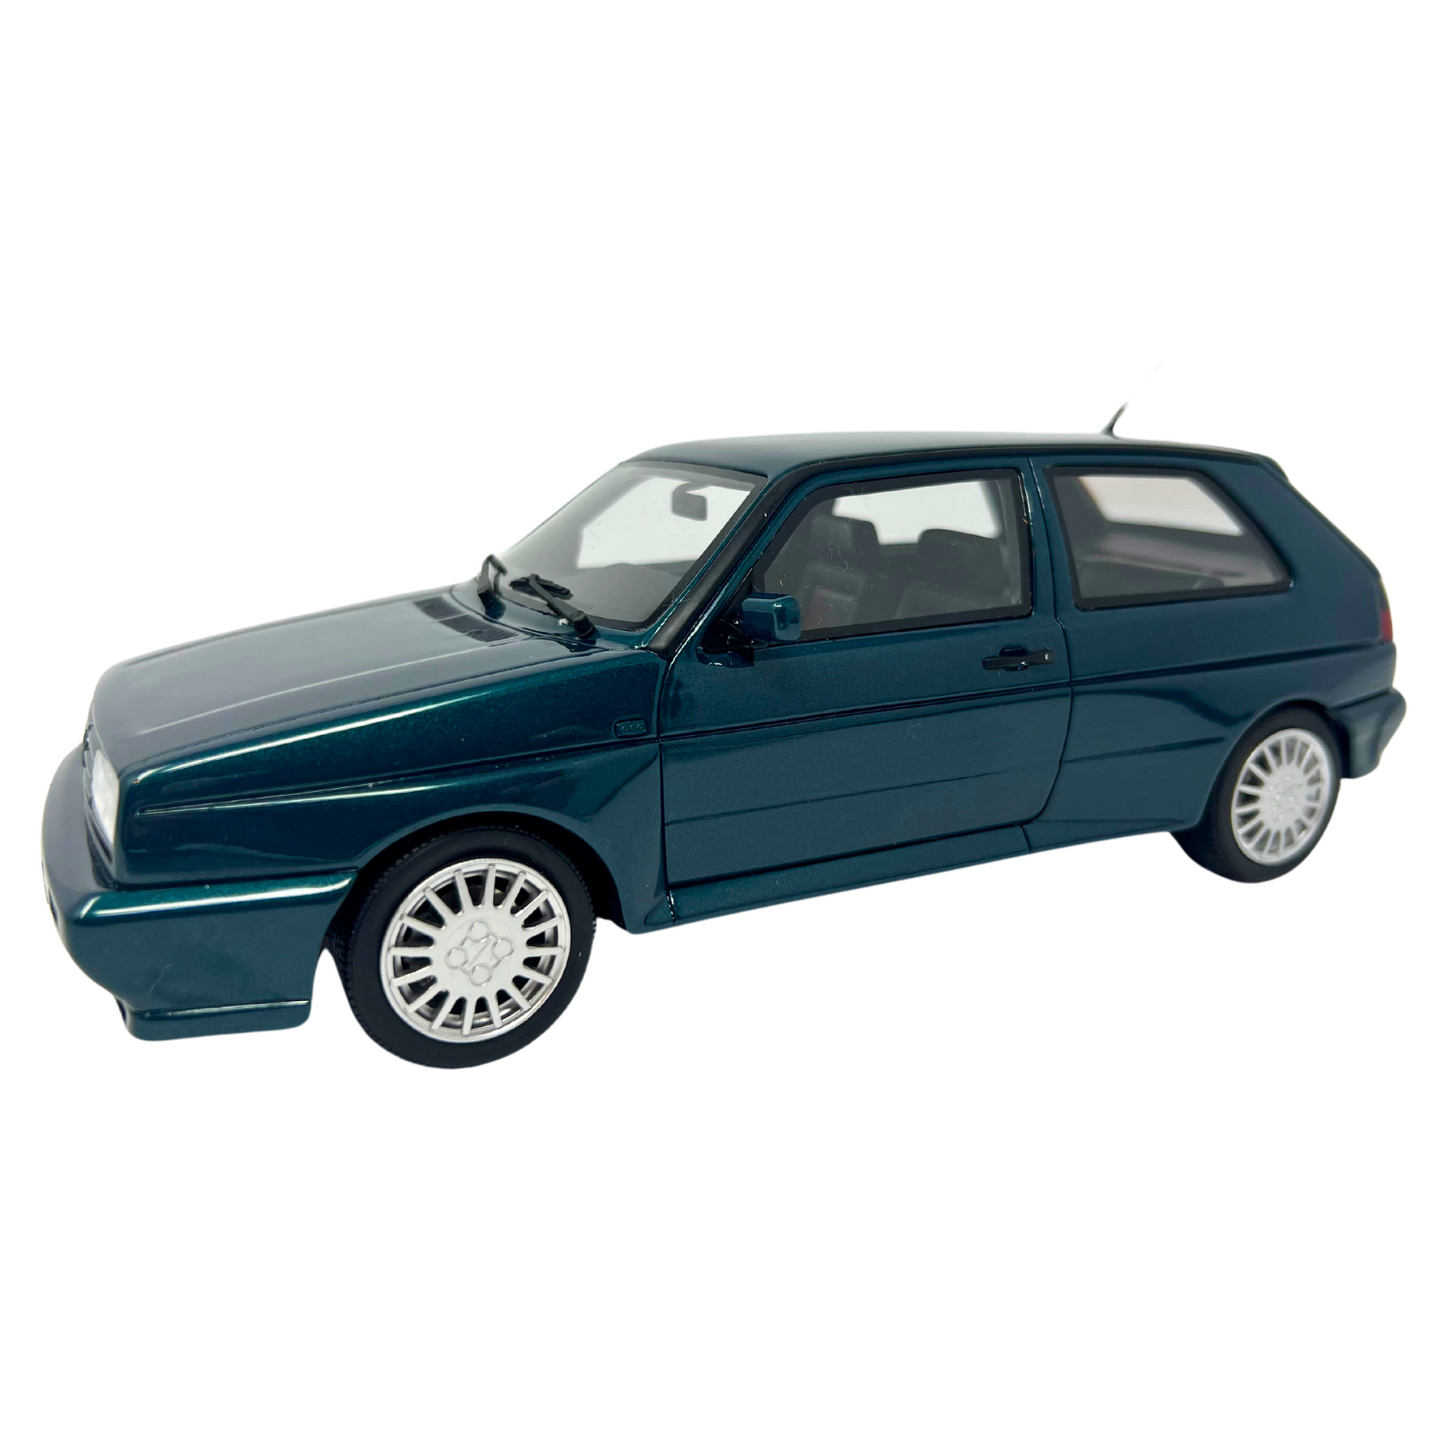 Otto Mobile 1990 Volkswagen Golf 2 MKII A2 G60 Rally 1:18 Resin Model